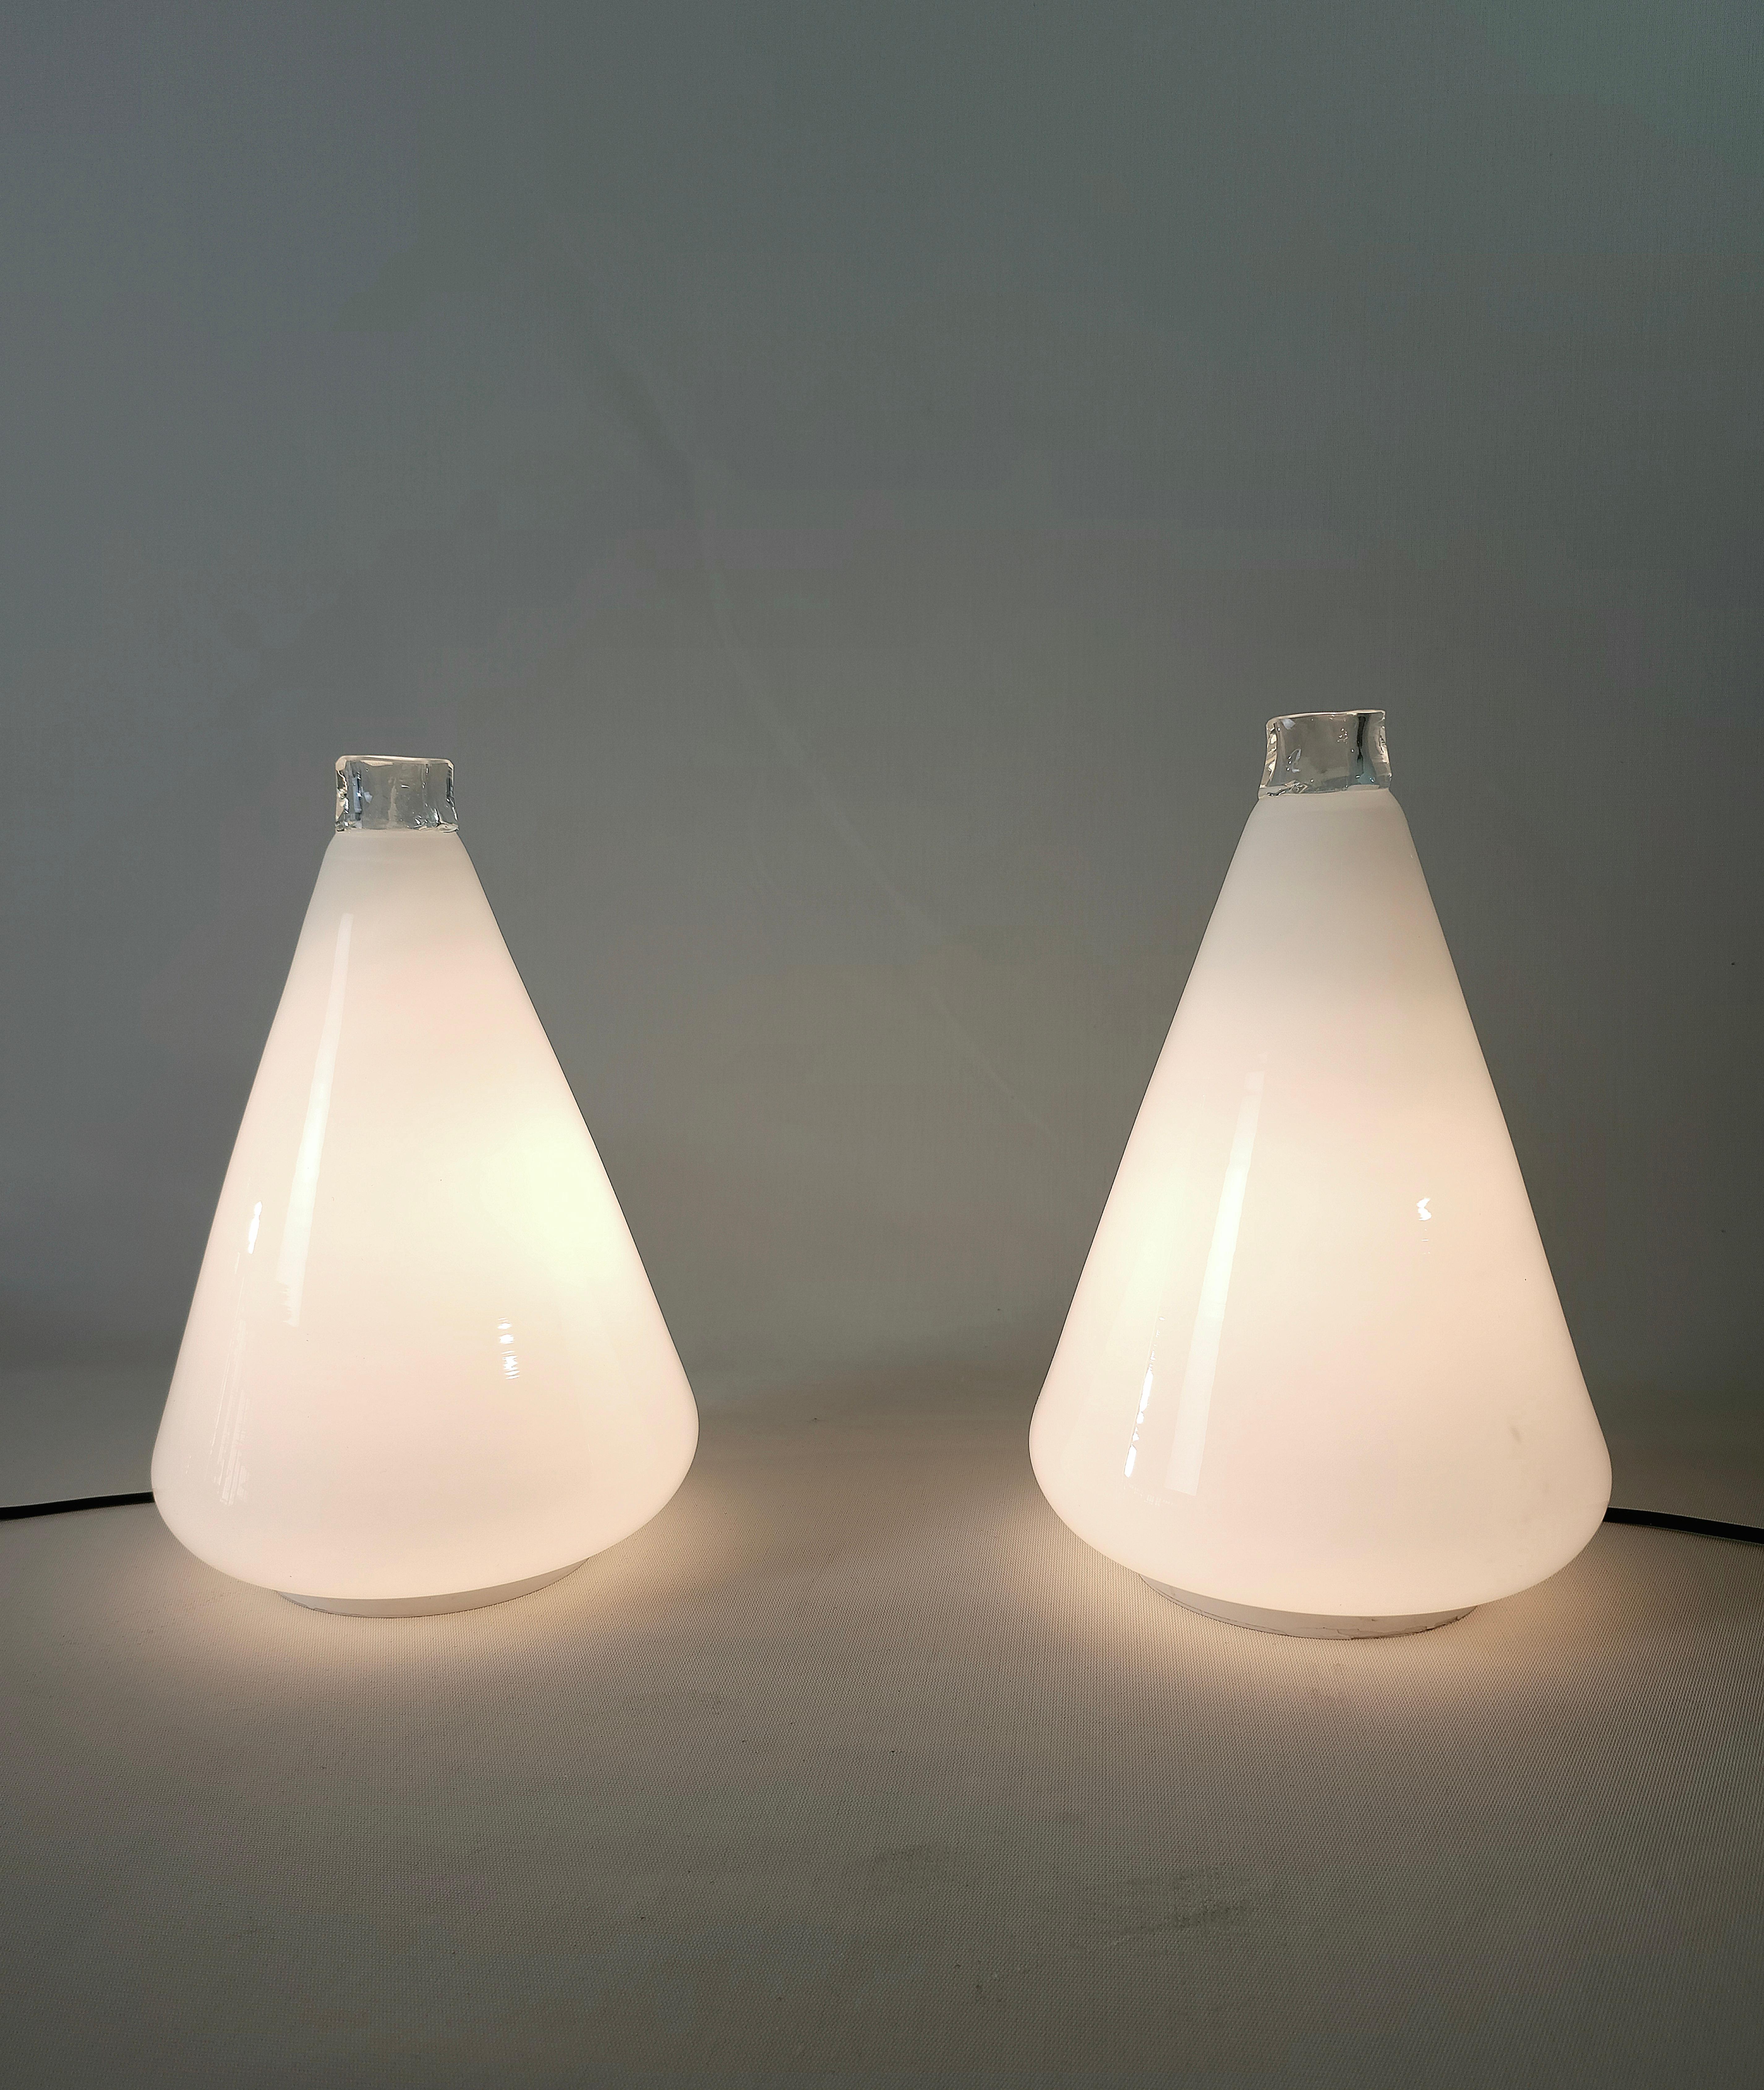 Large Murano Glass Table Lamps Leucos Model Buto by Noti Massari 1970s Set of 2 For Sale 2